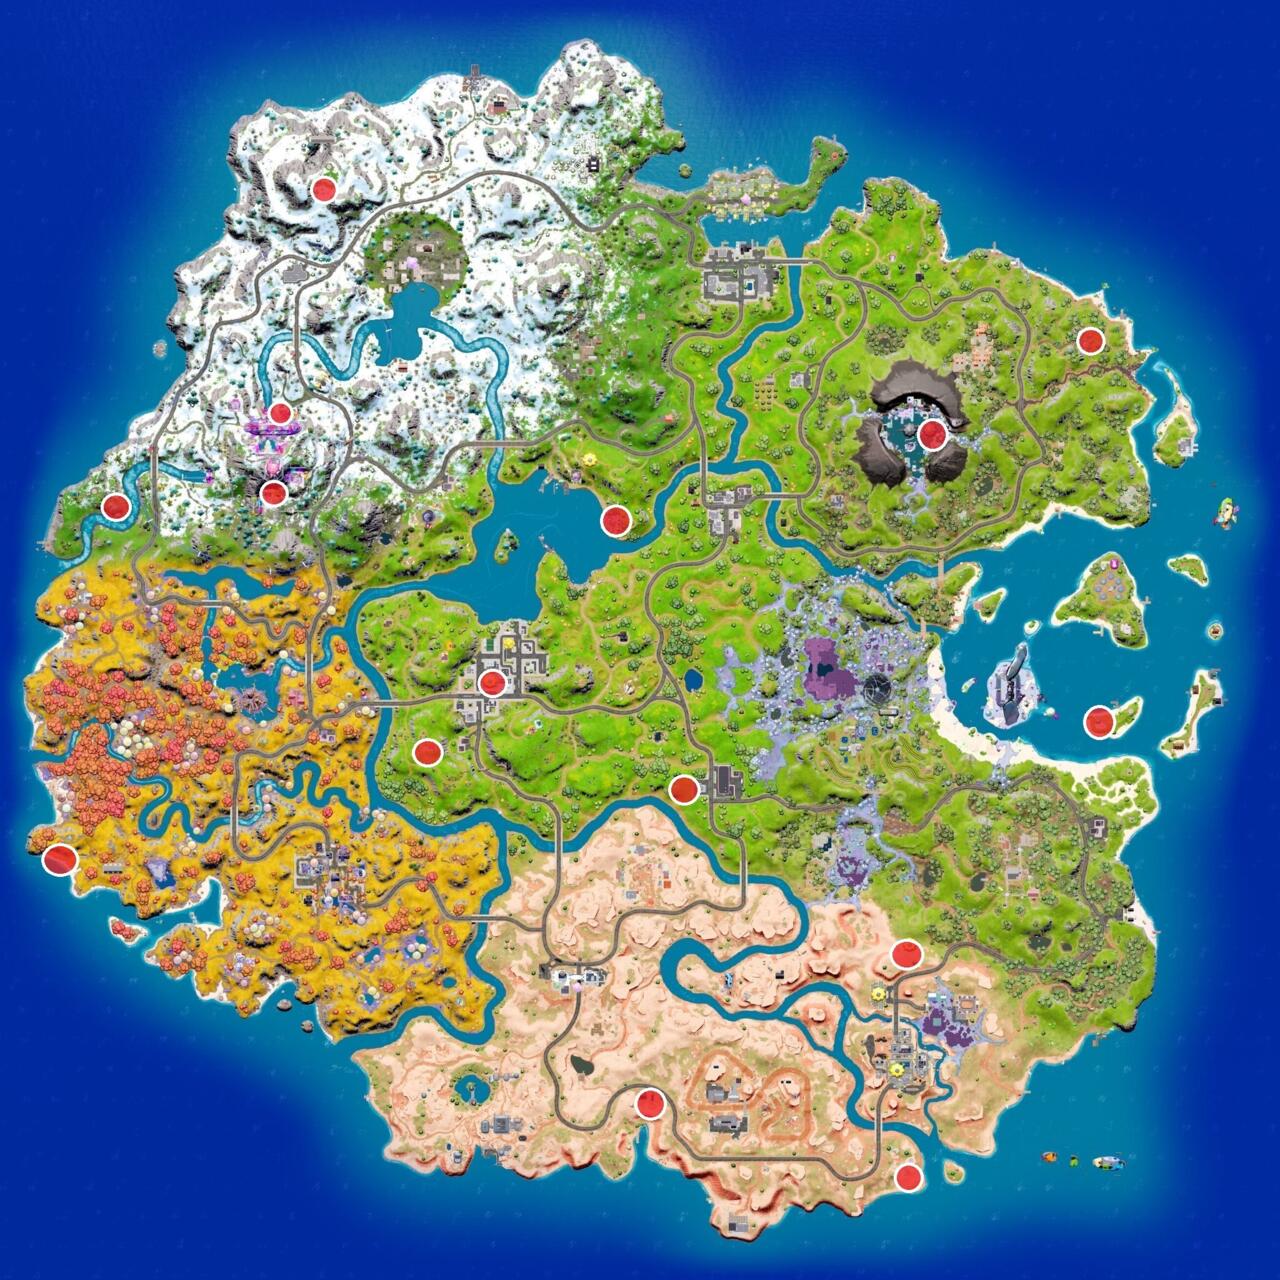 All Fortnite vaults in Chapter 3, Season 4